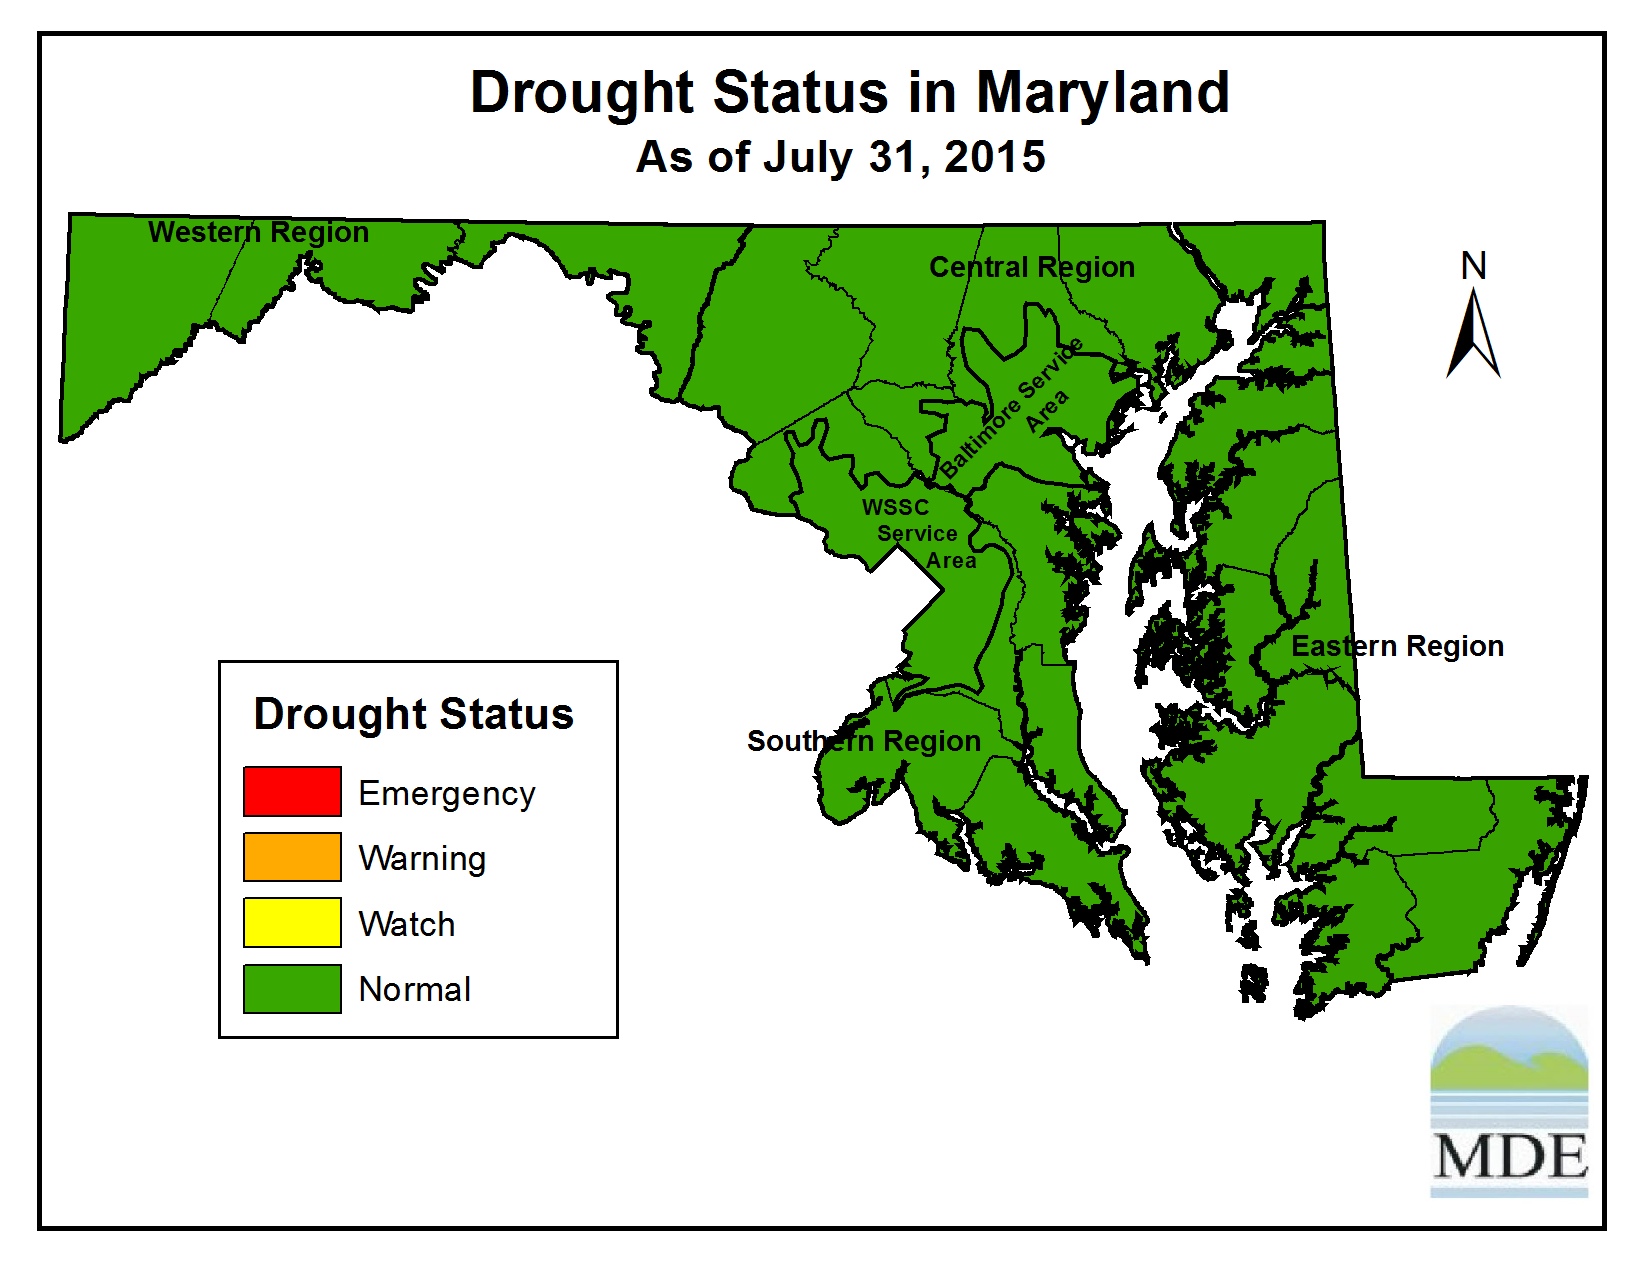 Drought Status as of July 31, 2015